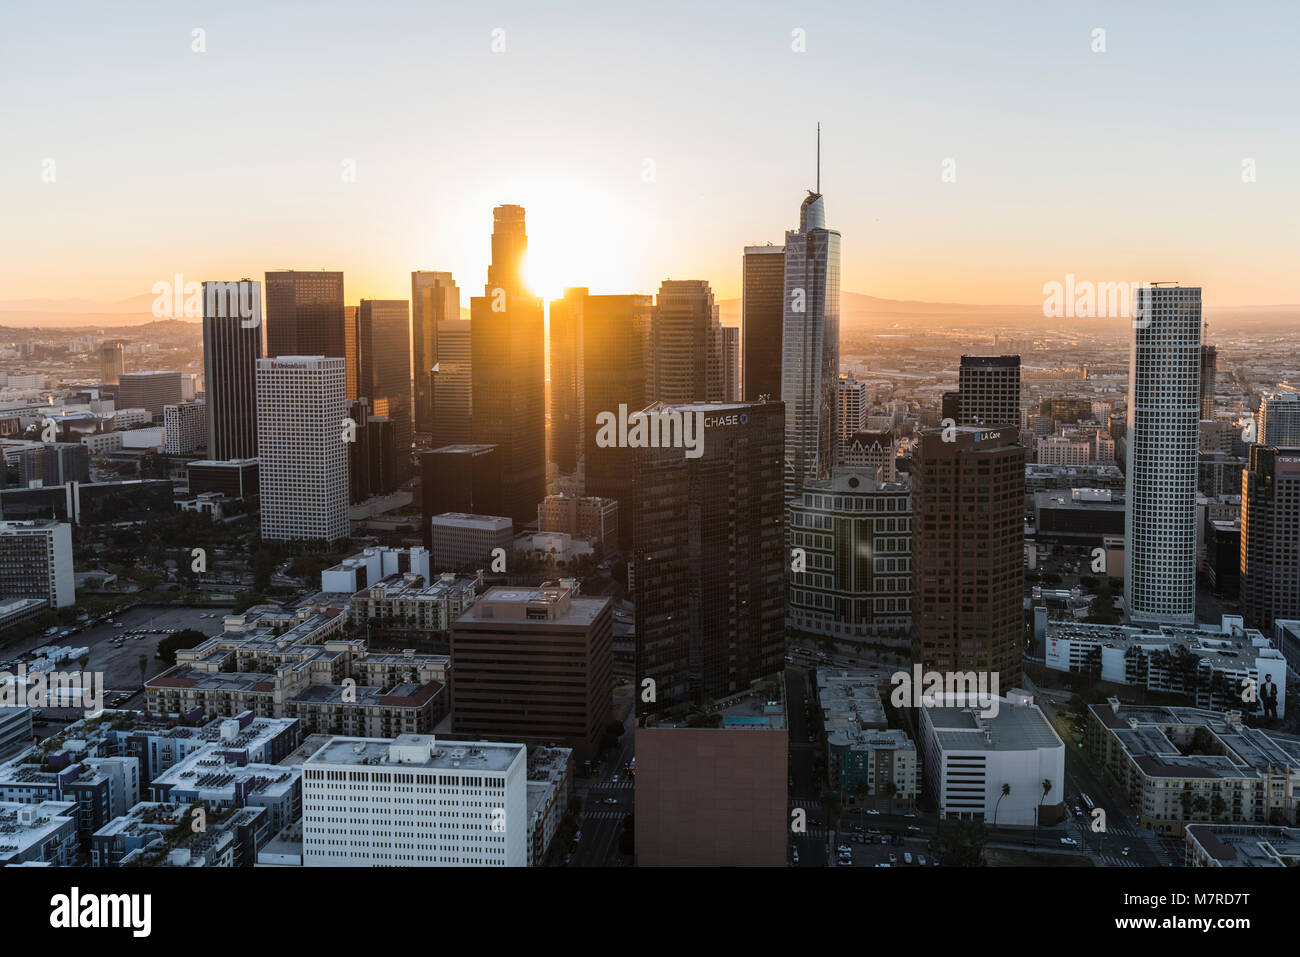 Los Angeles, California, USA - February 20, 2018:  Aerial view of morning sunshine shining through highrise towers in downtown LA. Stock Photo